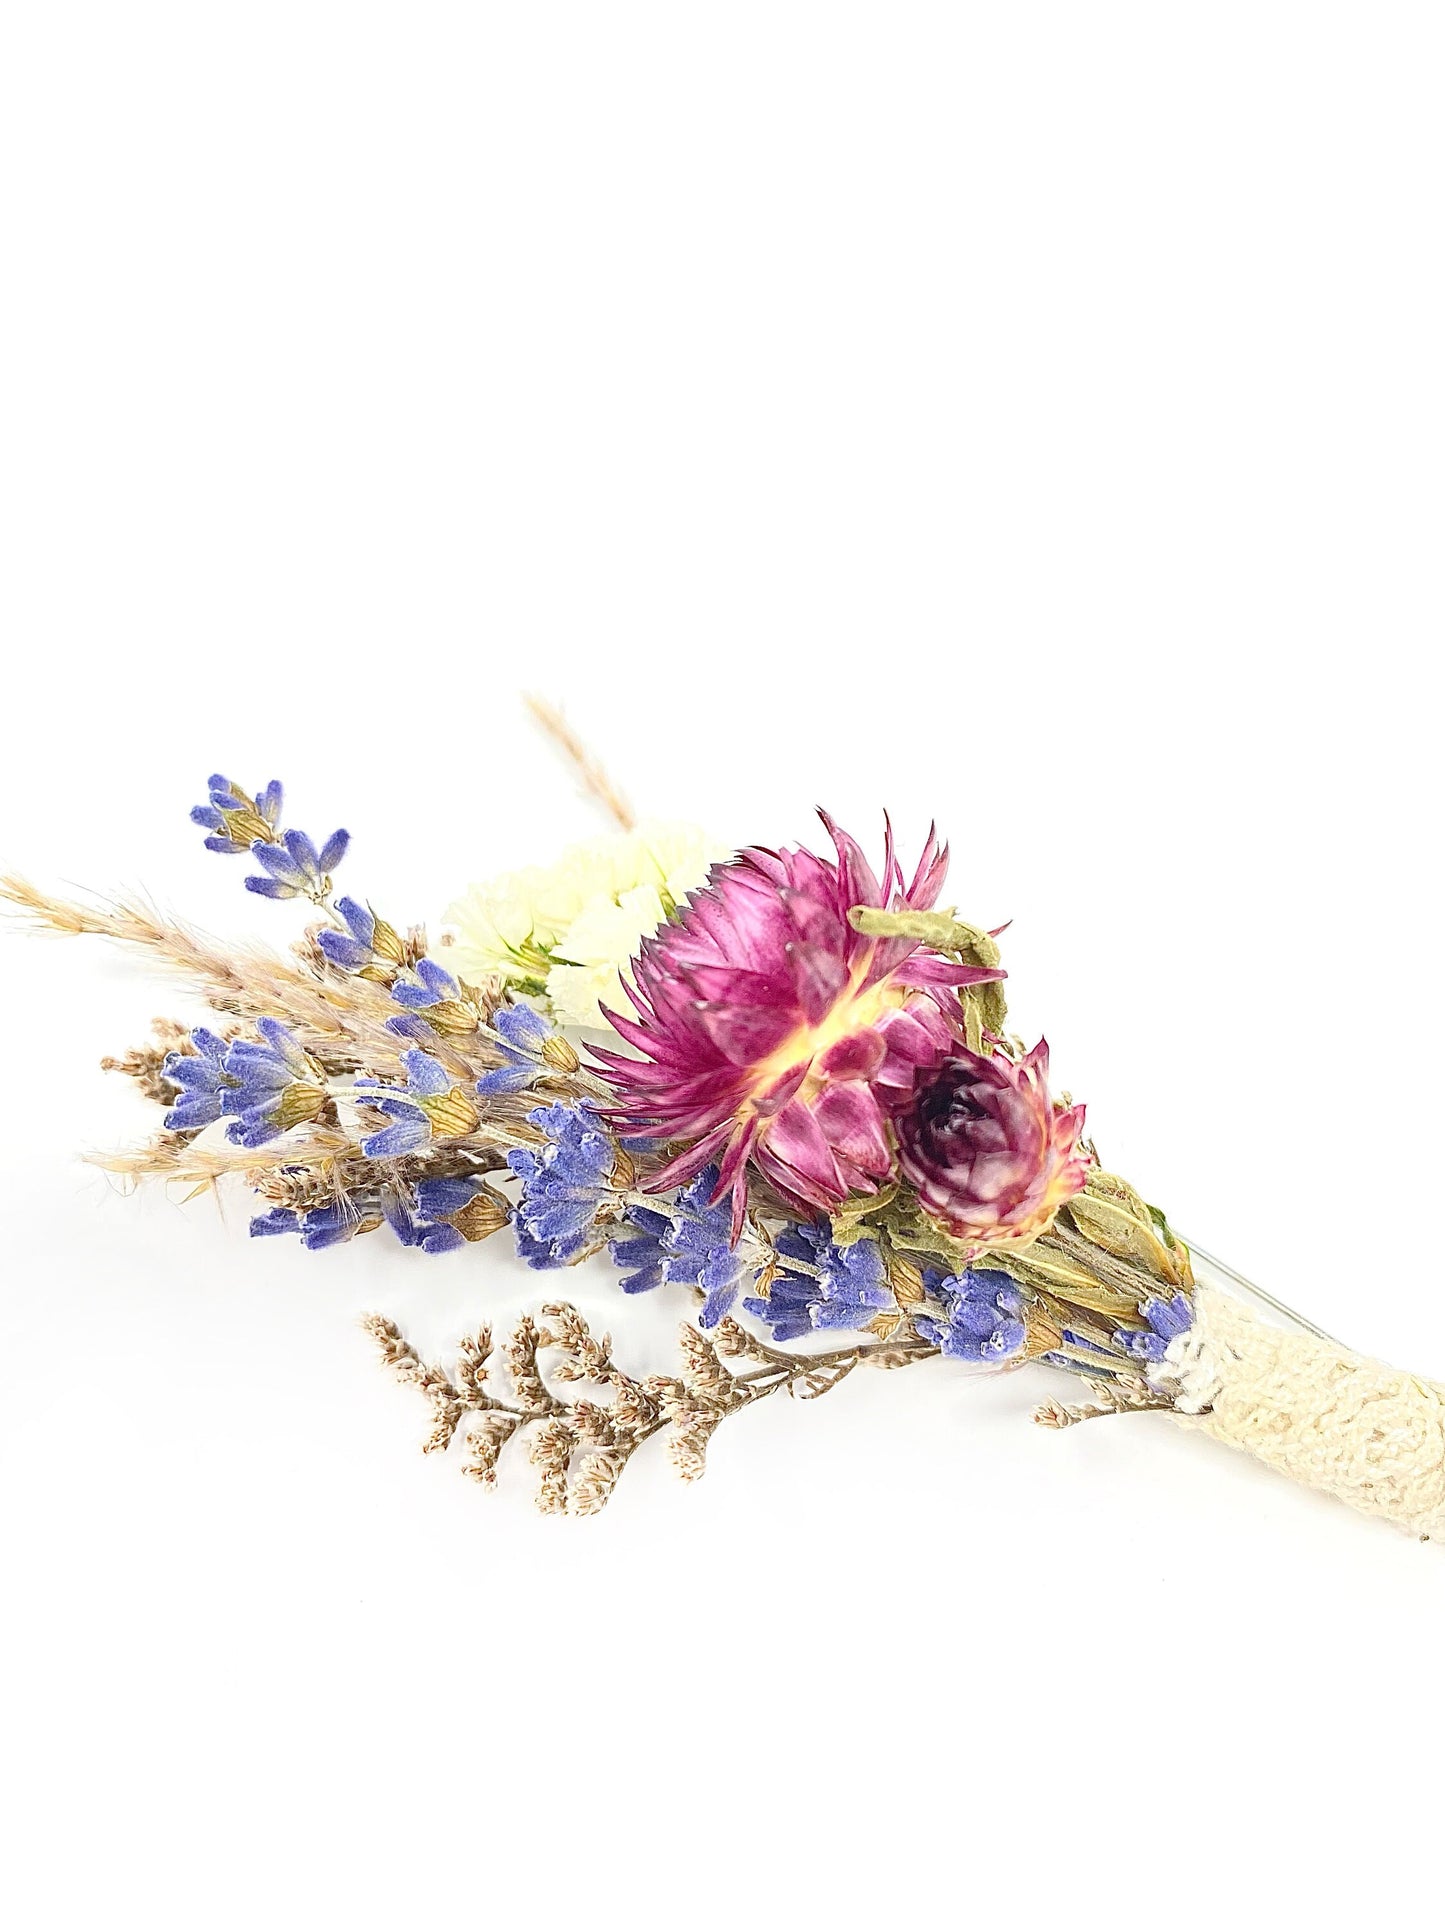 Wedding Boutonniere, Preserved Floral, Dried Flowers, Bridal Accessories, Decor, Strawflowers, Lavender